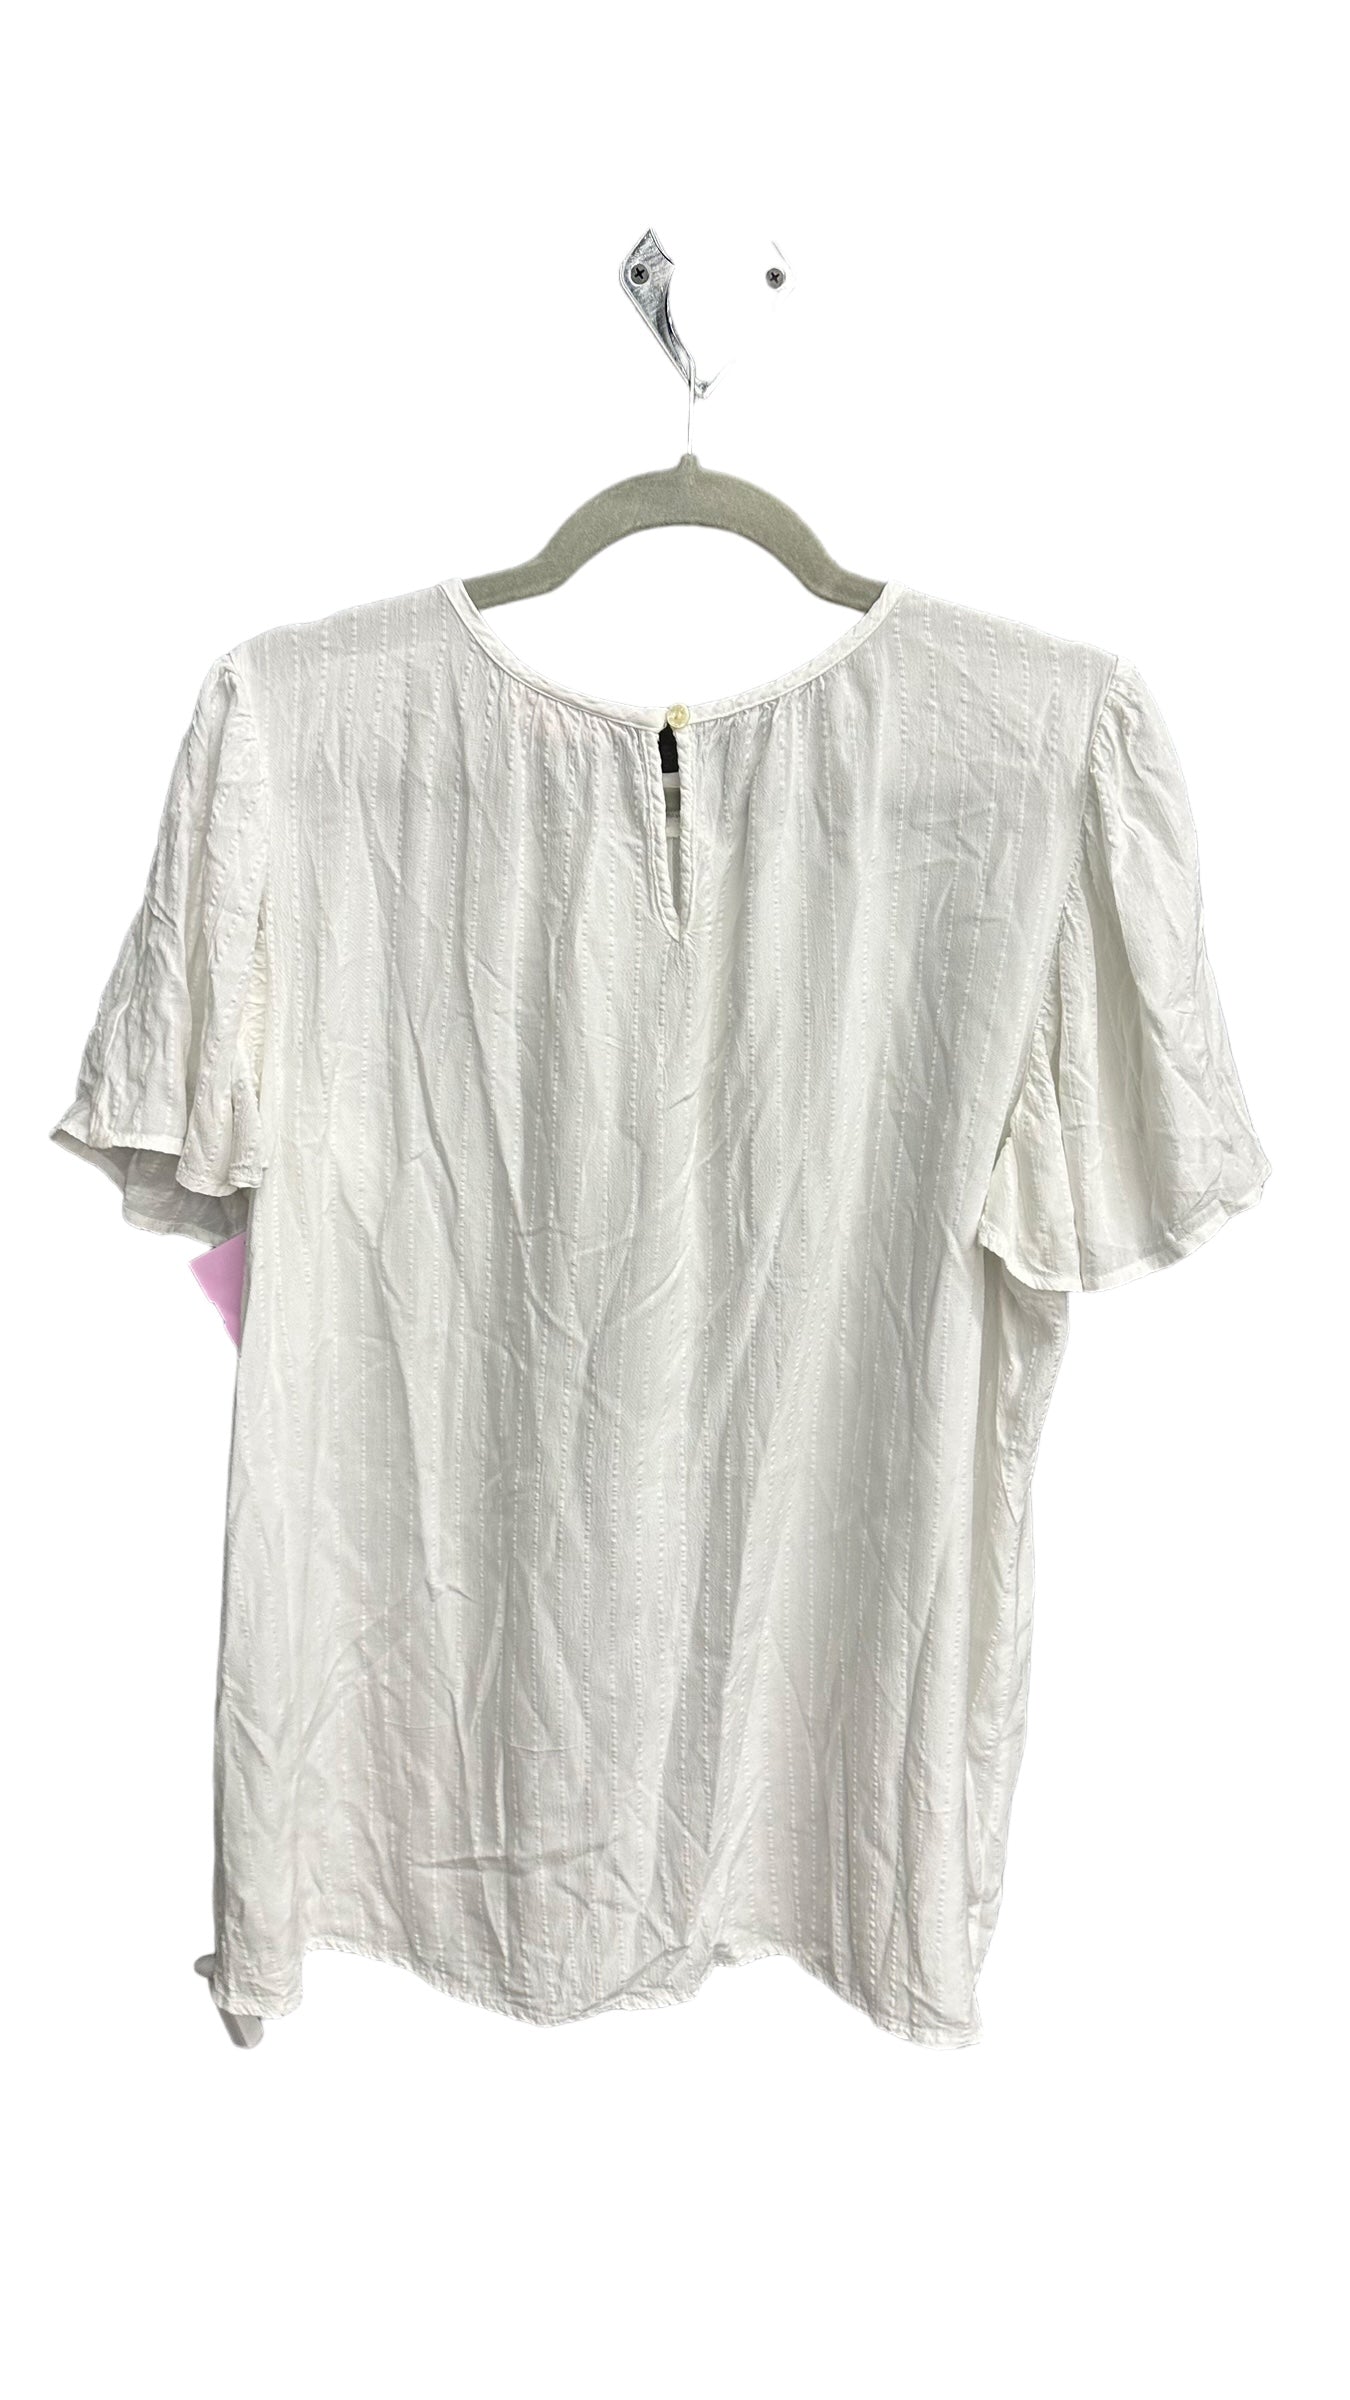 White Top Short Sleeve Knox Rose, Size M